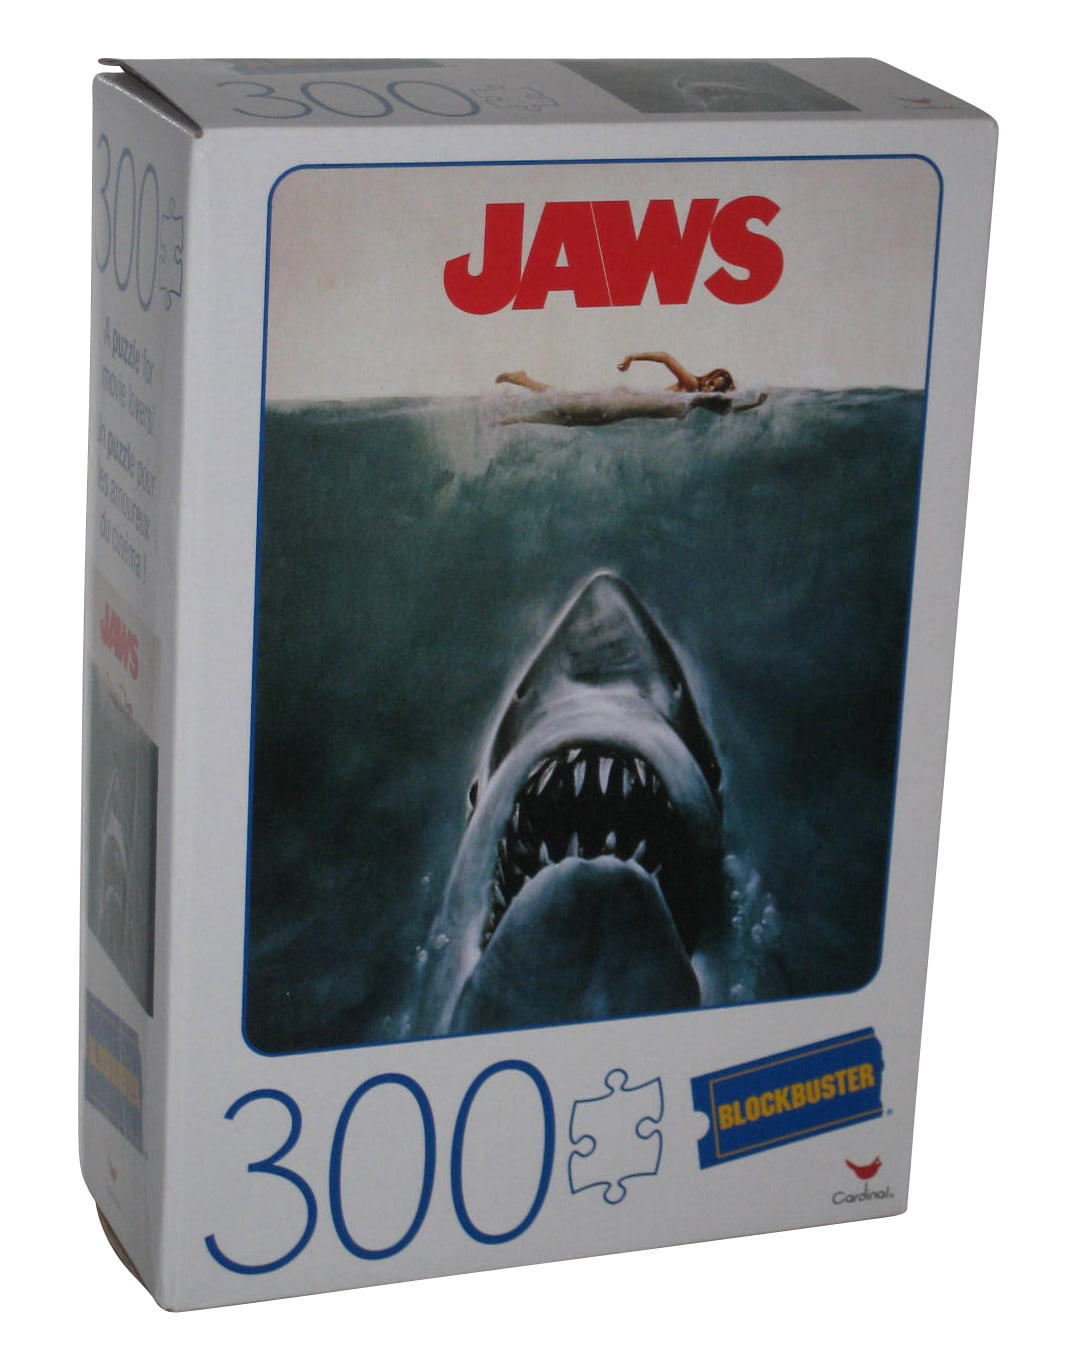 Details about   Blockbuster JAWS POSTER 300 PIECE Jigsaw Puzzle Retro Cardinal Brand 